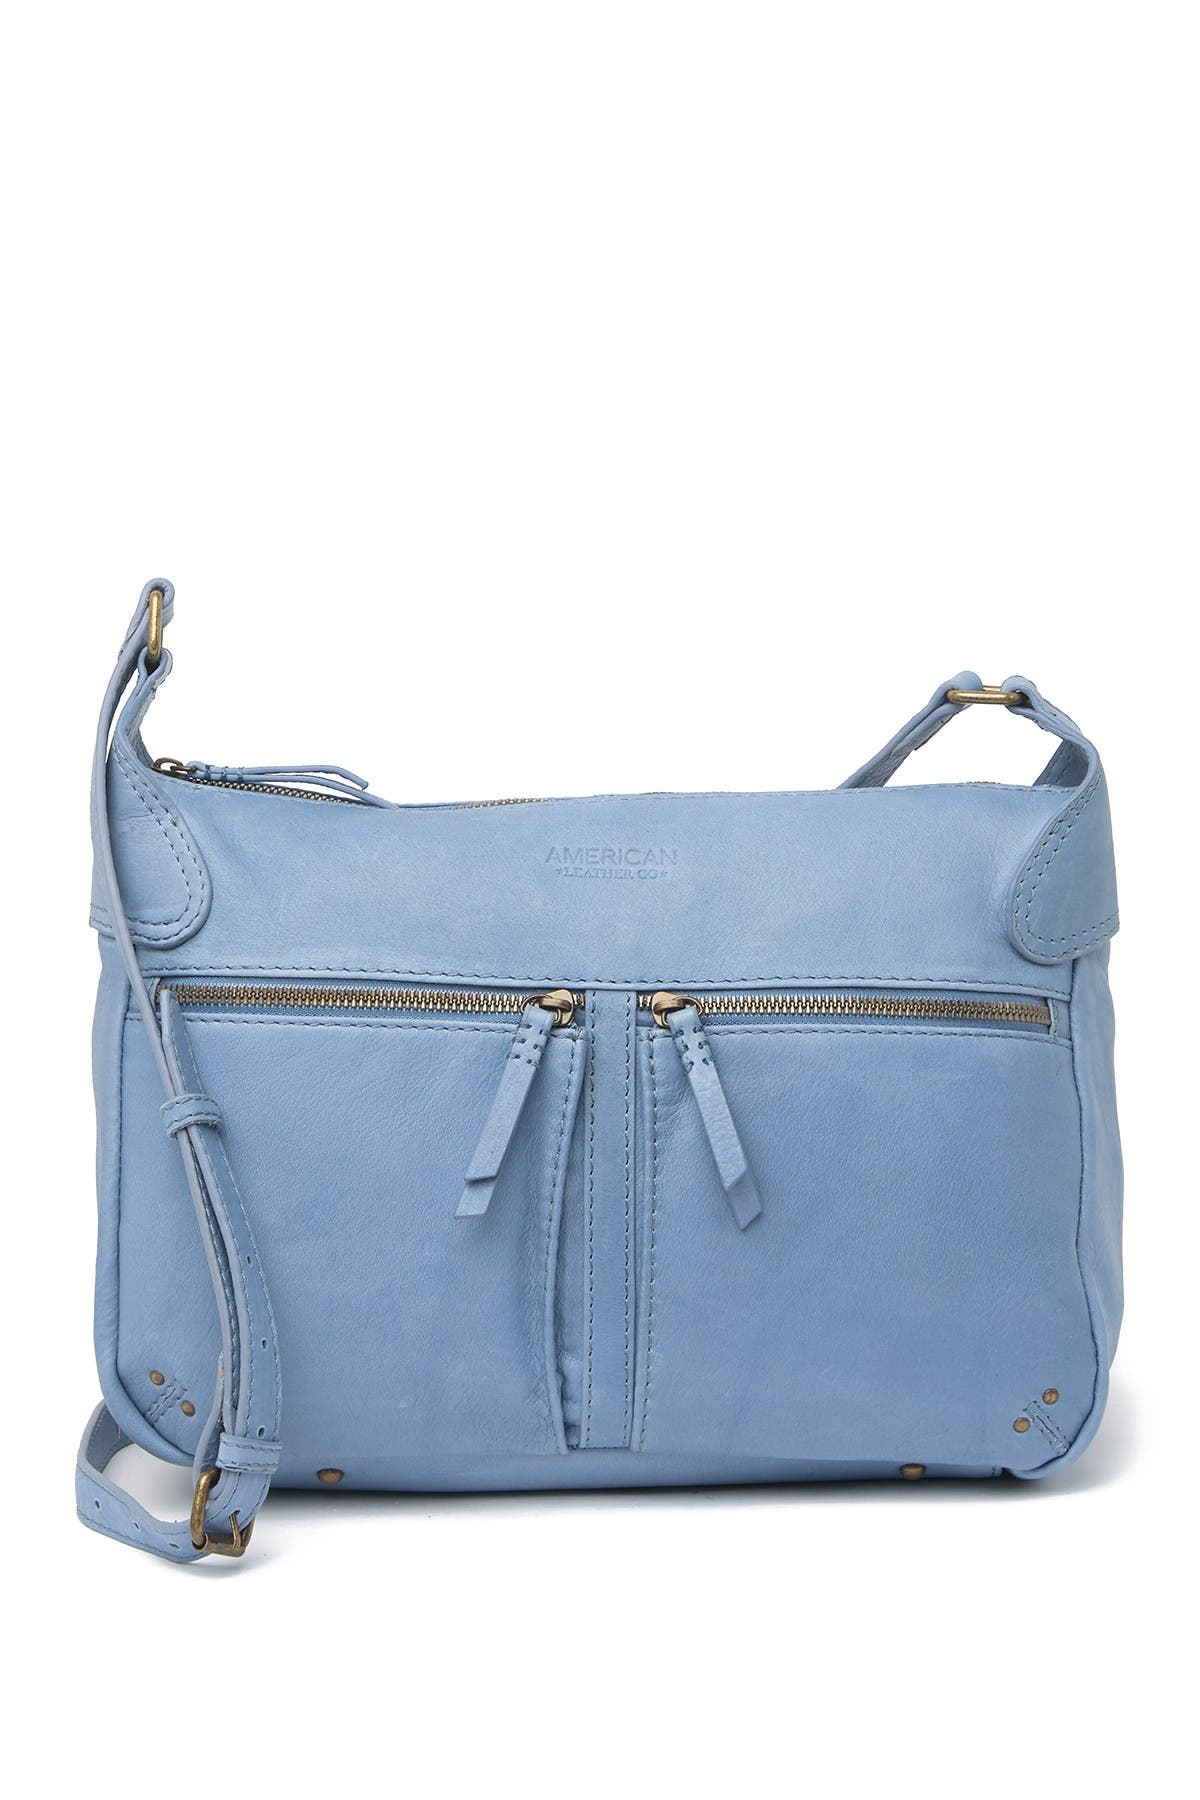 American Leather Co. Hanover Crossbody Leather Bag In Light/pastel Blue9